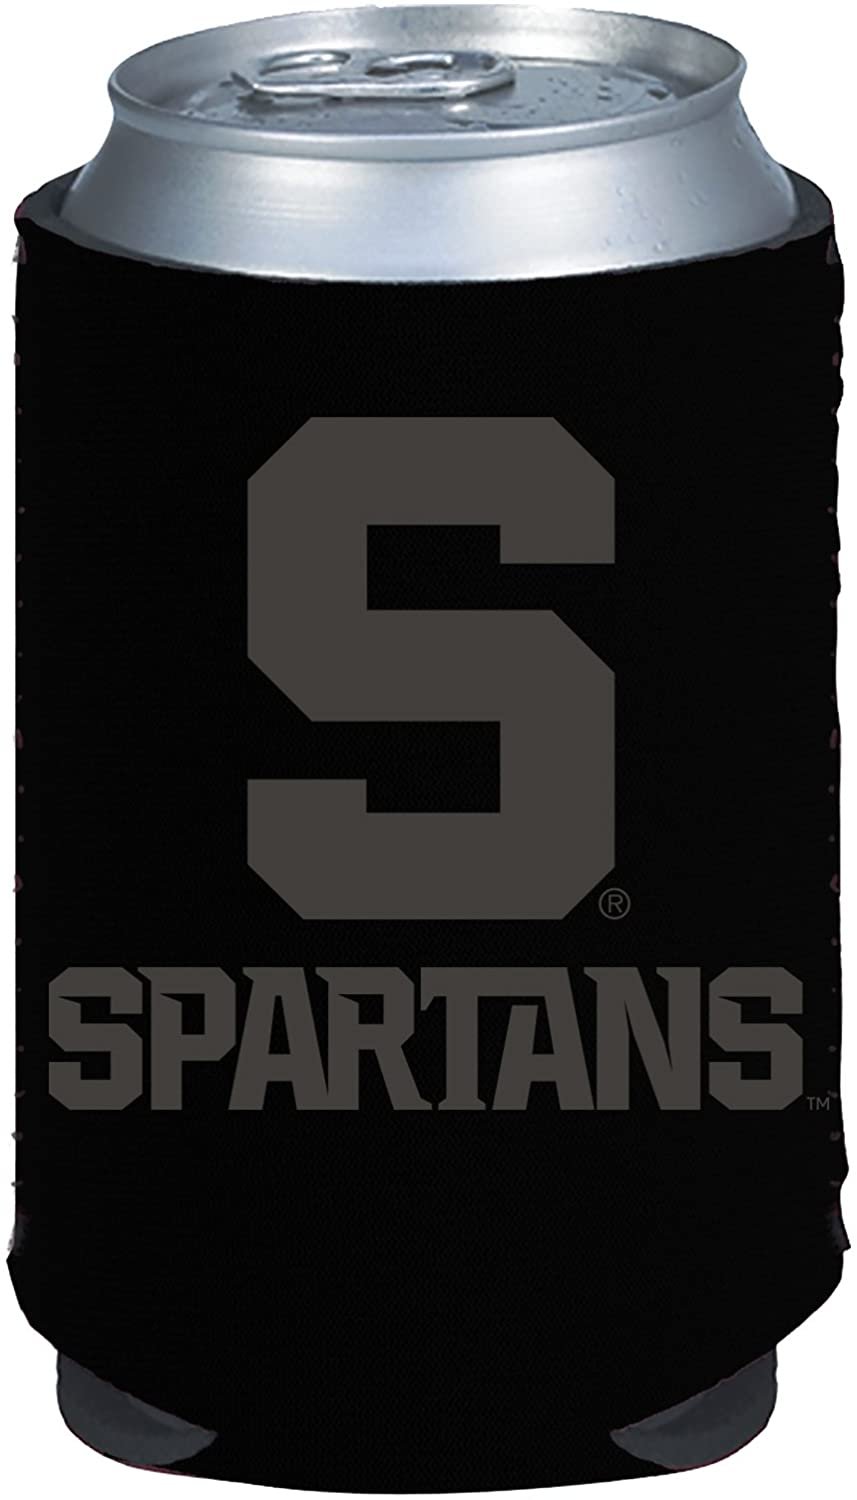 Michigan State Spartans 2-Pack Black Tonal CAN Beverage Insulator Neoprene Holder Cooler Decal University of